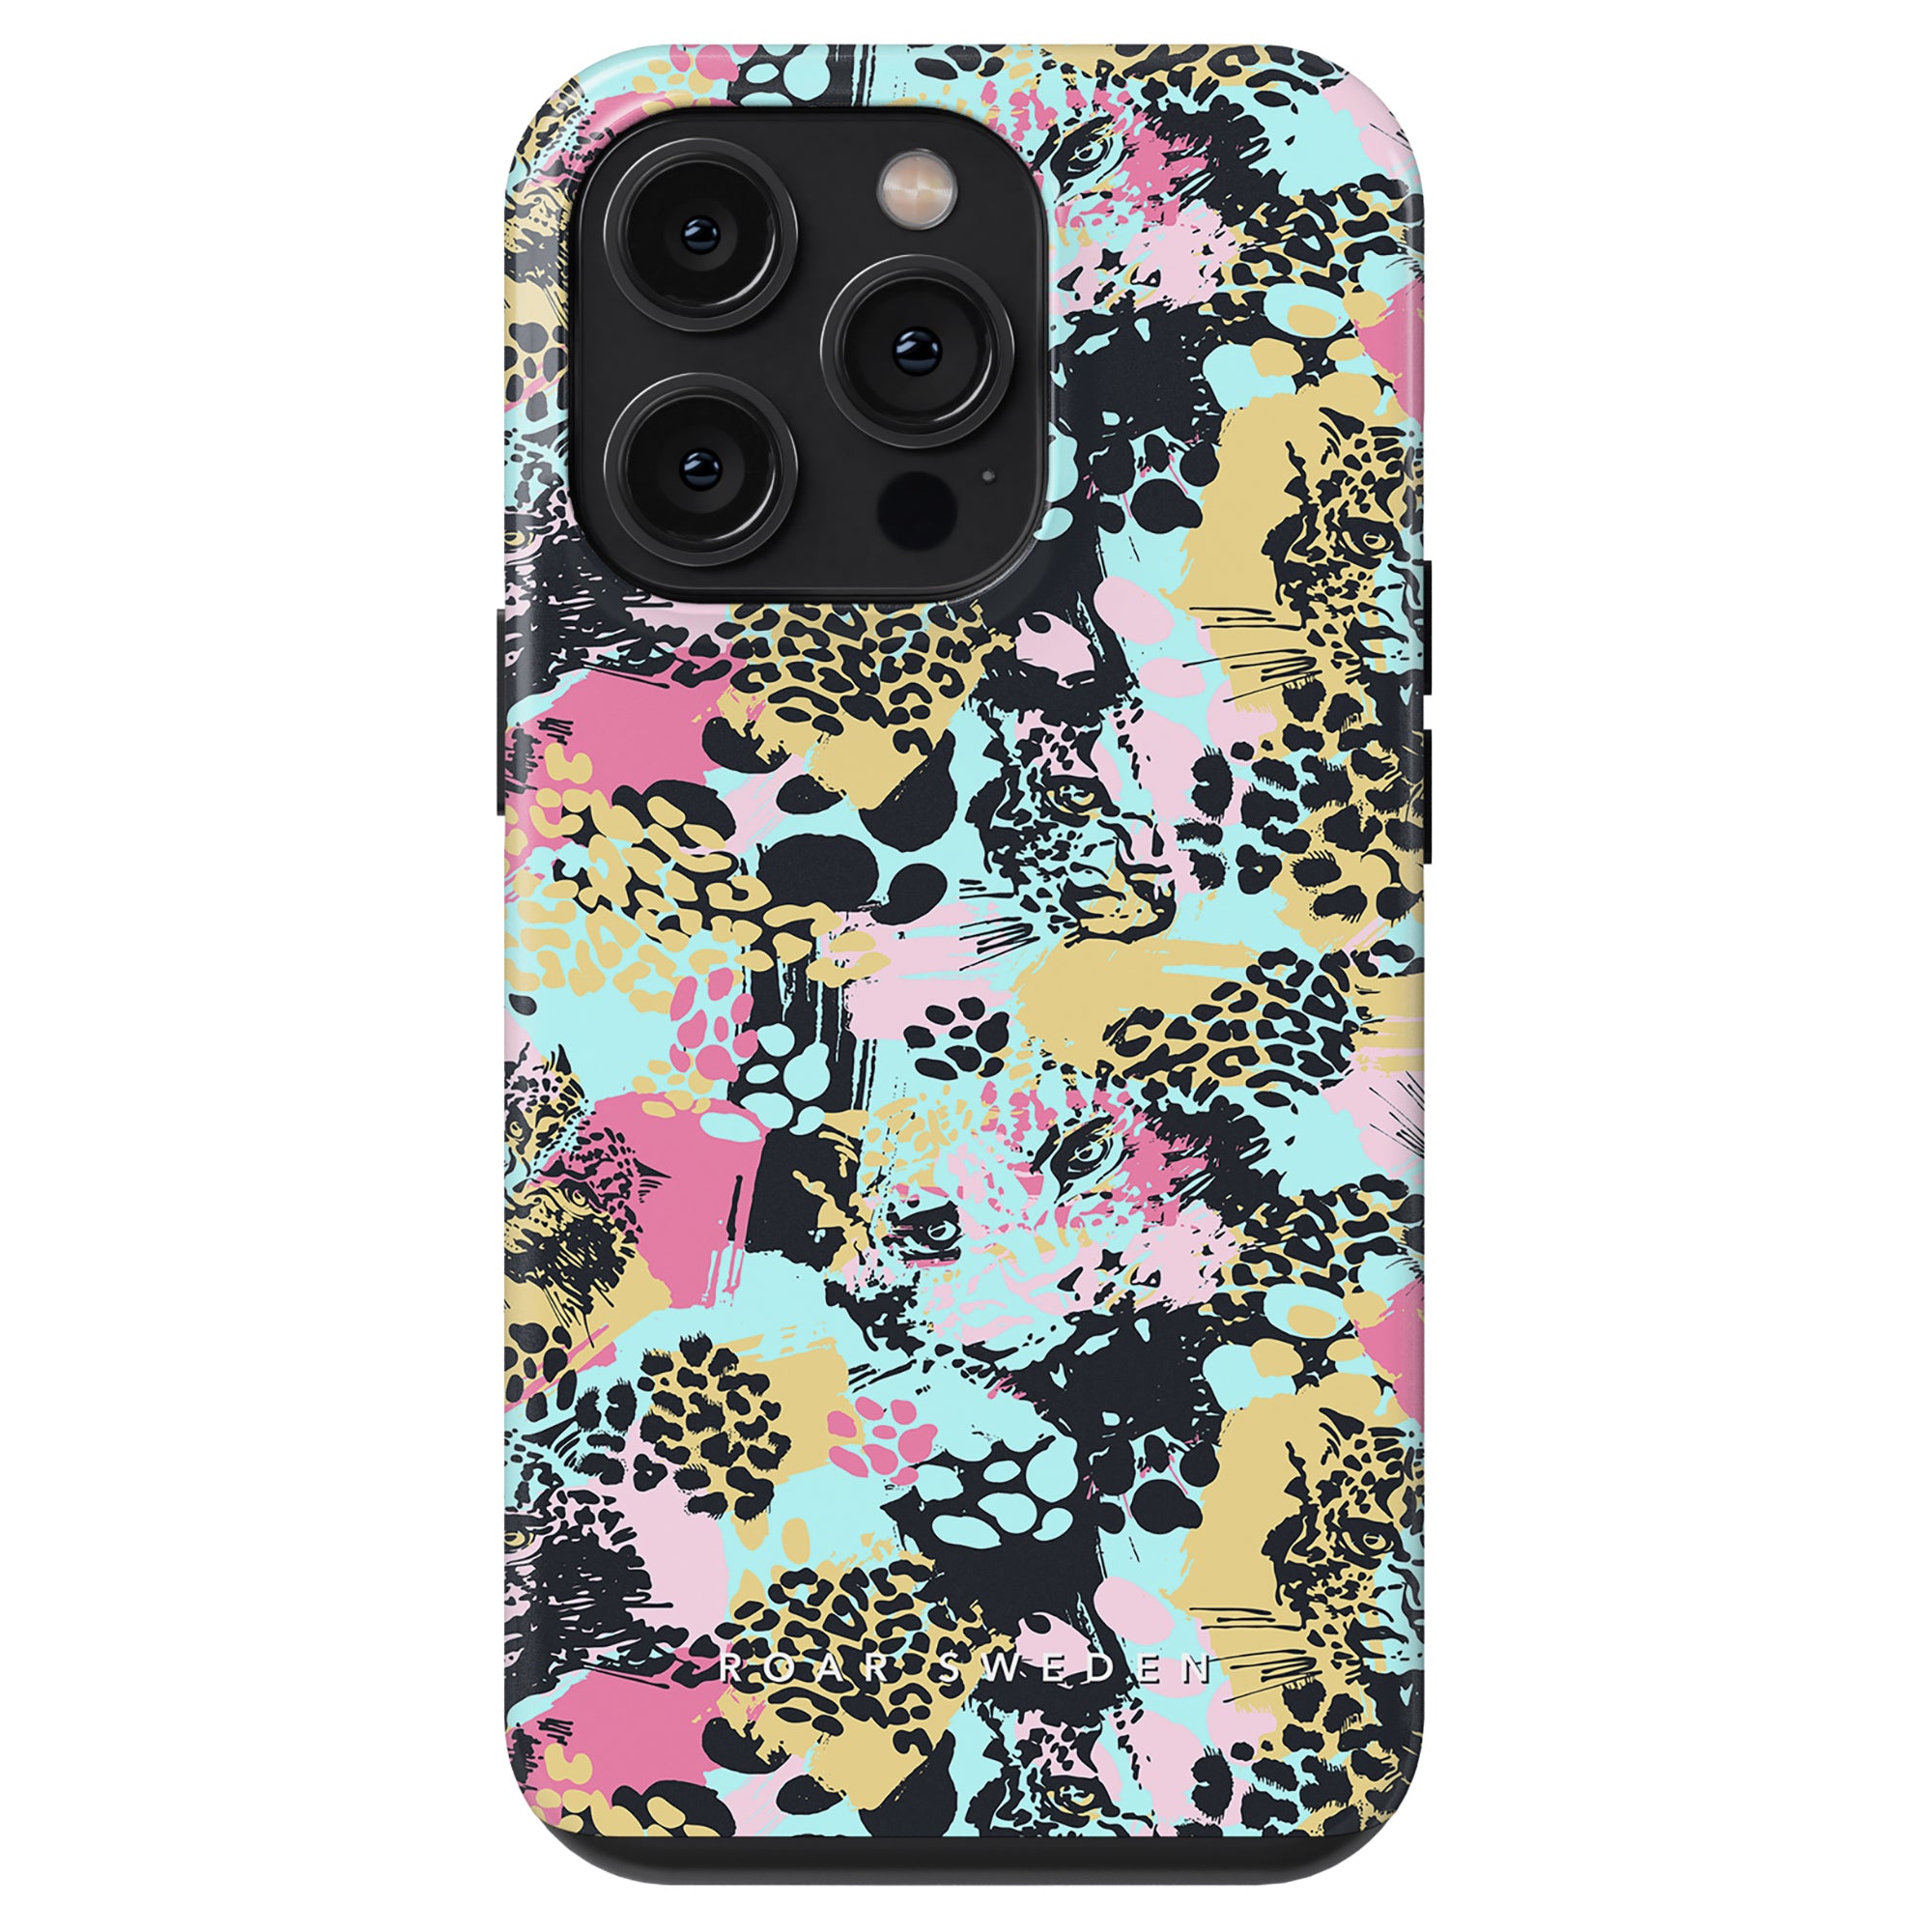 Bite - Tough Case from the hybrid kollektion with a vibrant animal print pattern featuring leopard spots and abstract splashes in pink, yellow, and black, designed for a model with three camera lenses.